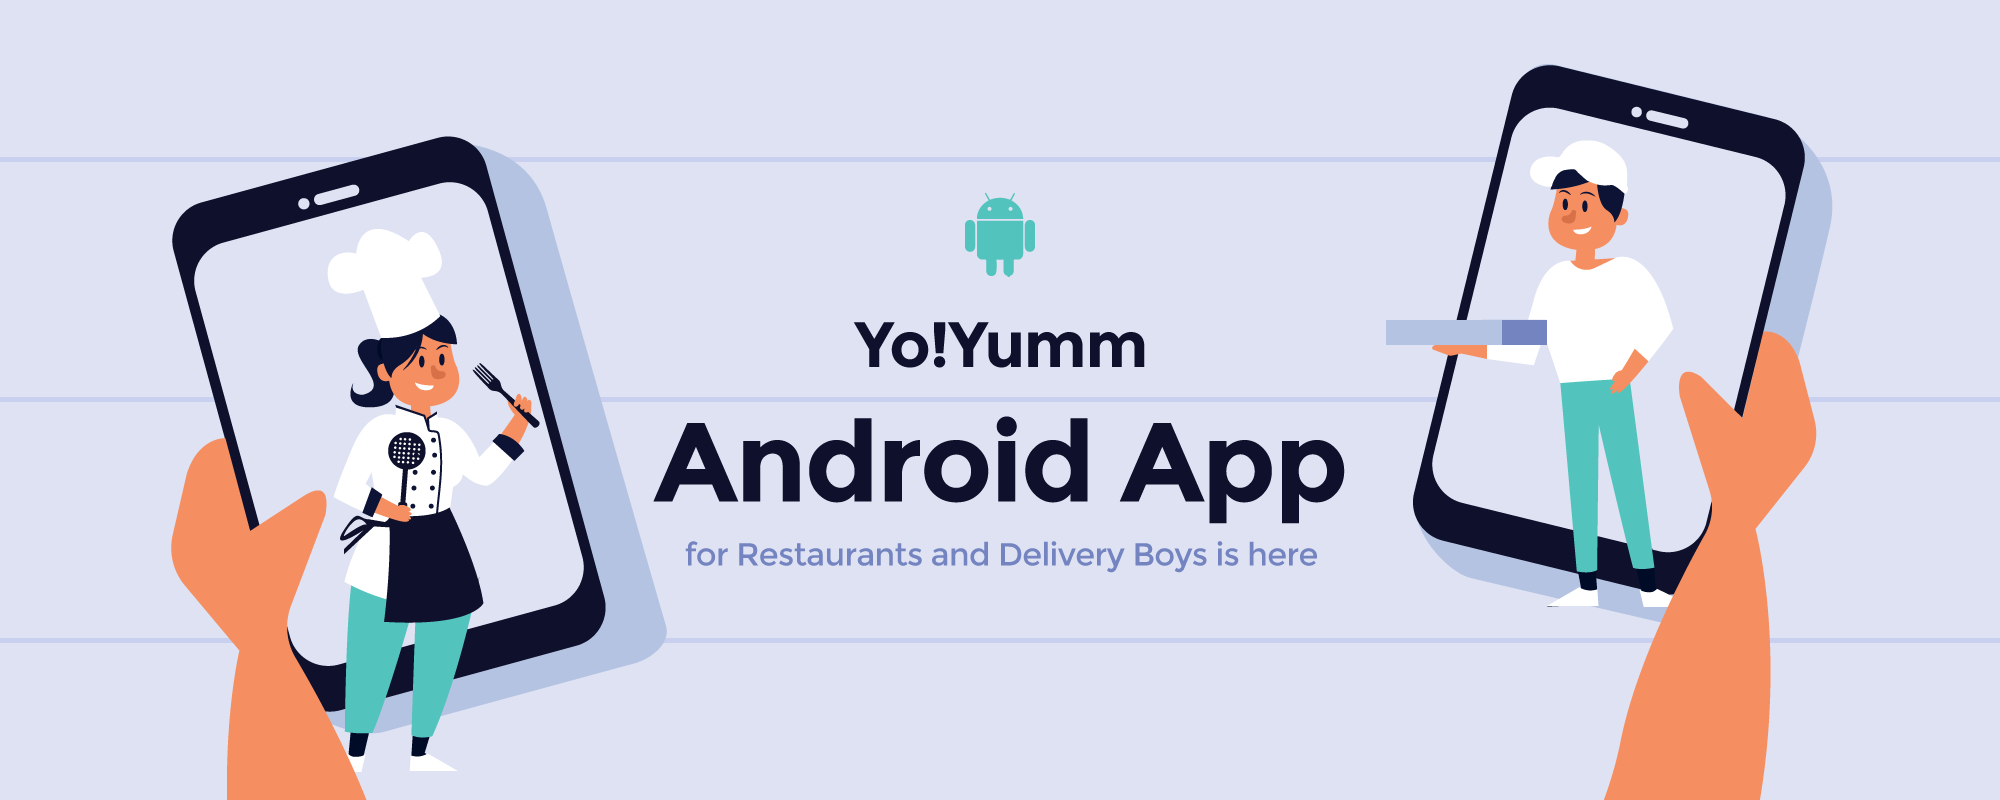 YoYumm Now Comes with Mobile Apps for Restaurants & Delivery Boys